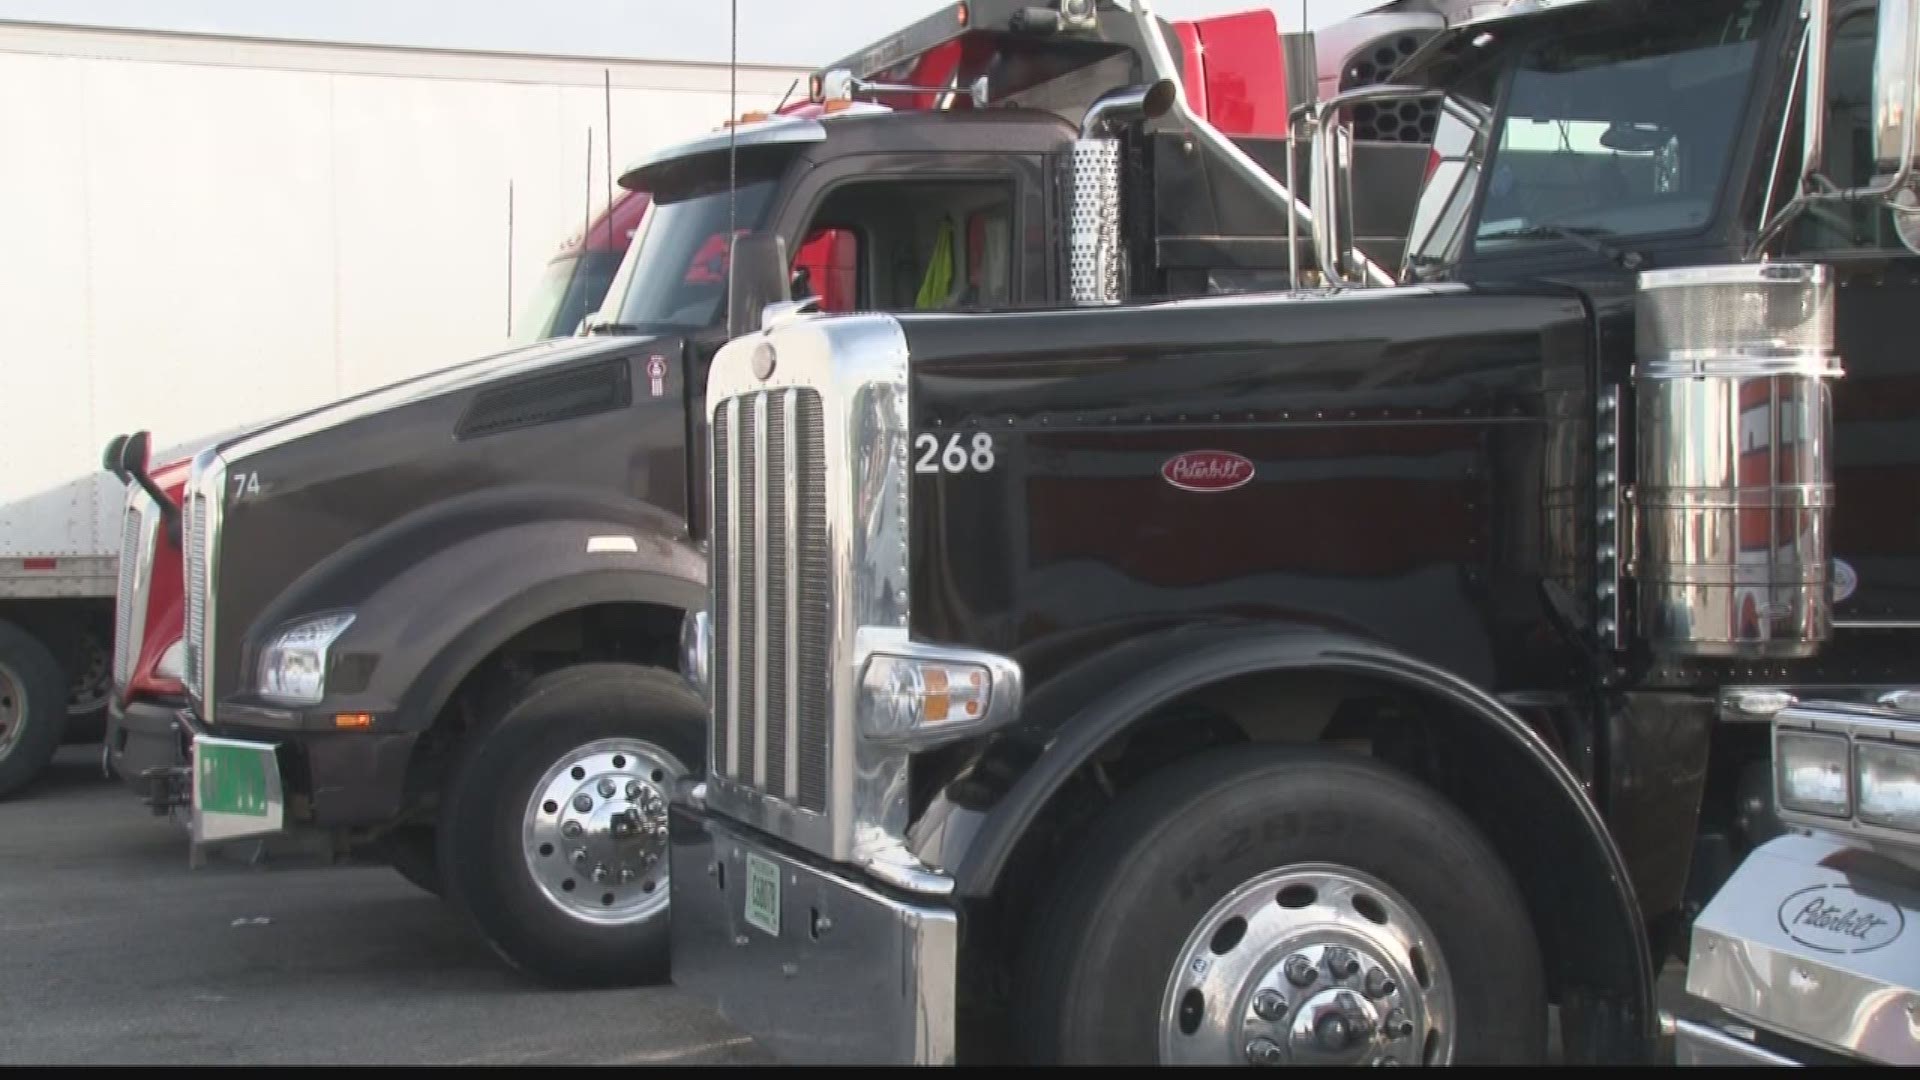 Truckers use their horns to communicate out on the highways. It's a piercing sound that moves through the air, and Todd Anderson says he wants the message behind the horns to be heard. He wants better working conditions for truckers.